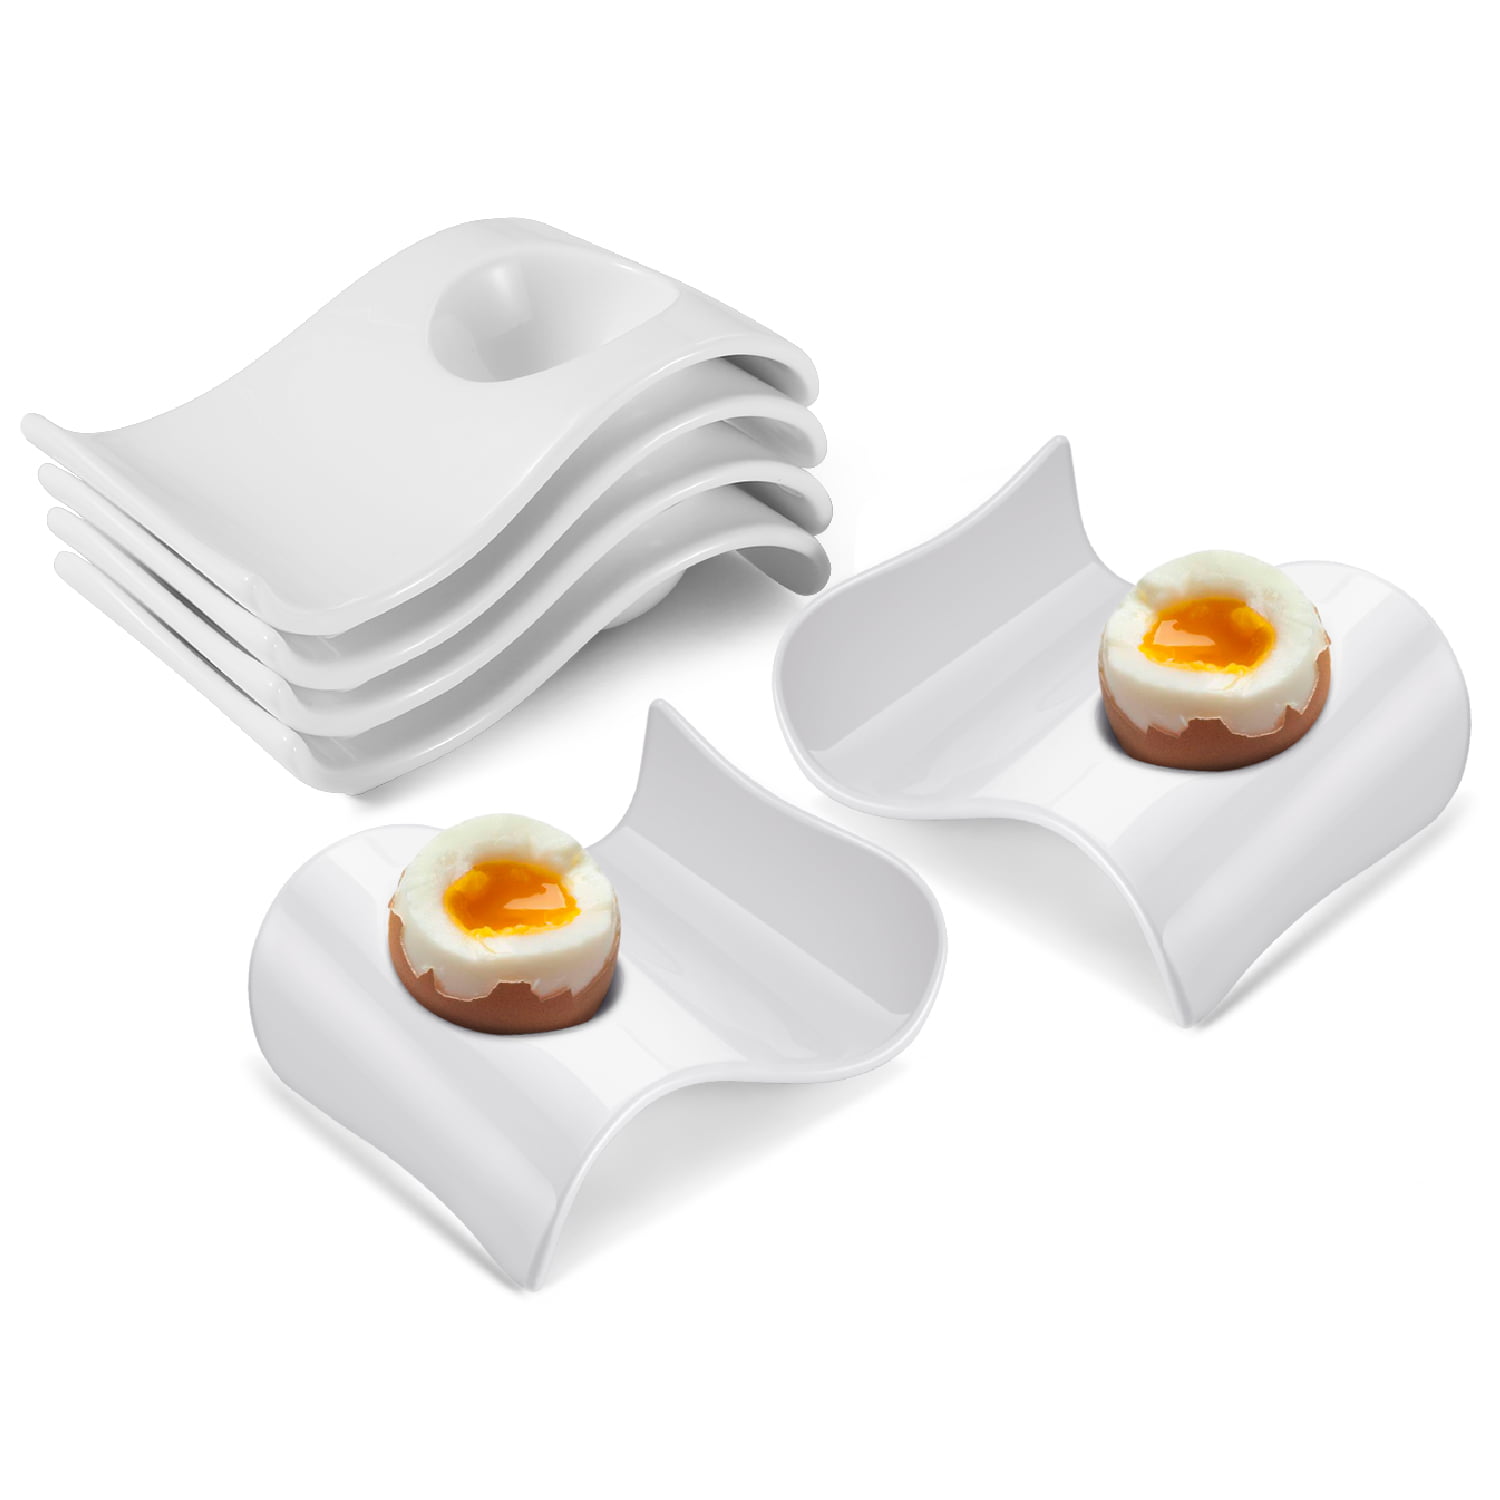 FELTECHELECTR 1pc Stew Container Boiled Egg Cup Single Egg Cup Egg  Breakfast Cup Egg Stand Holder Poached Egg Cup Pottery Egg Cups Ceramic Egg  Holder